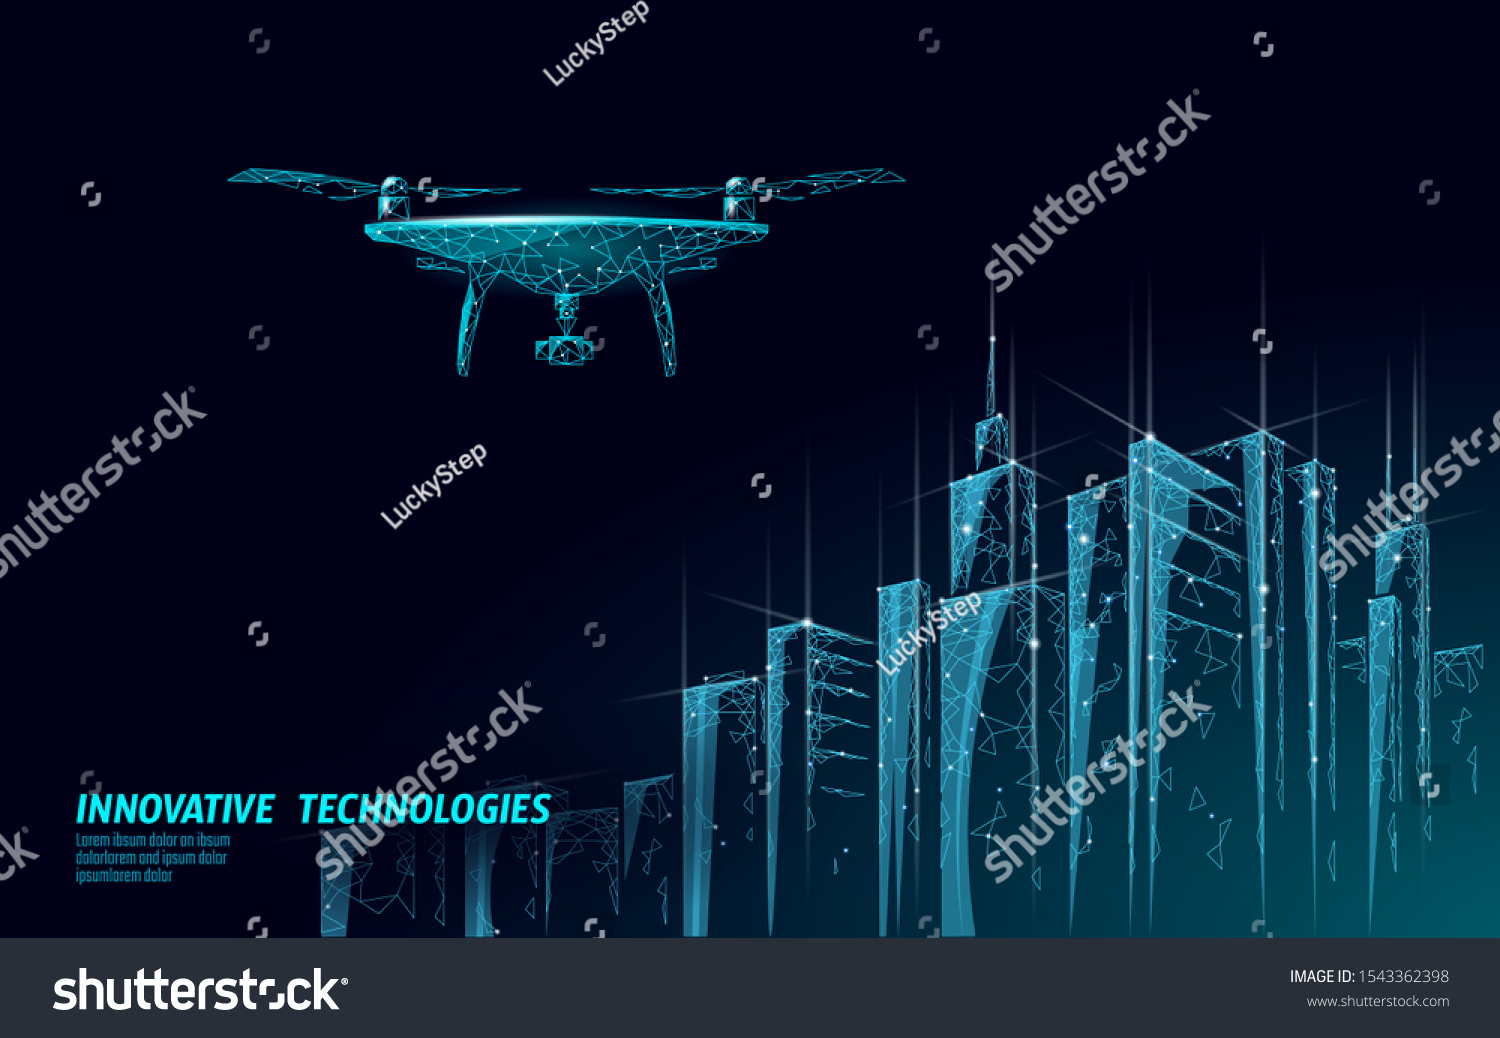 Unmanned Aircraft Stock Vectors Images Vector Art Shutterstock